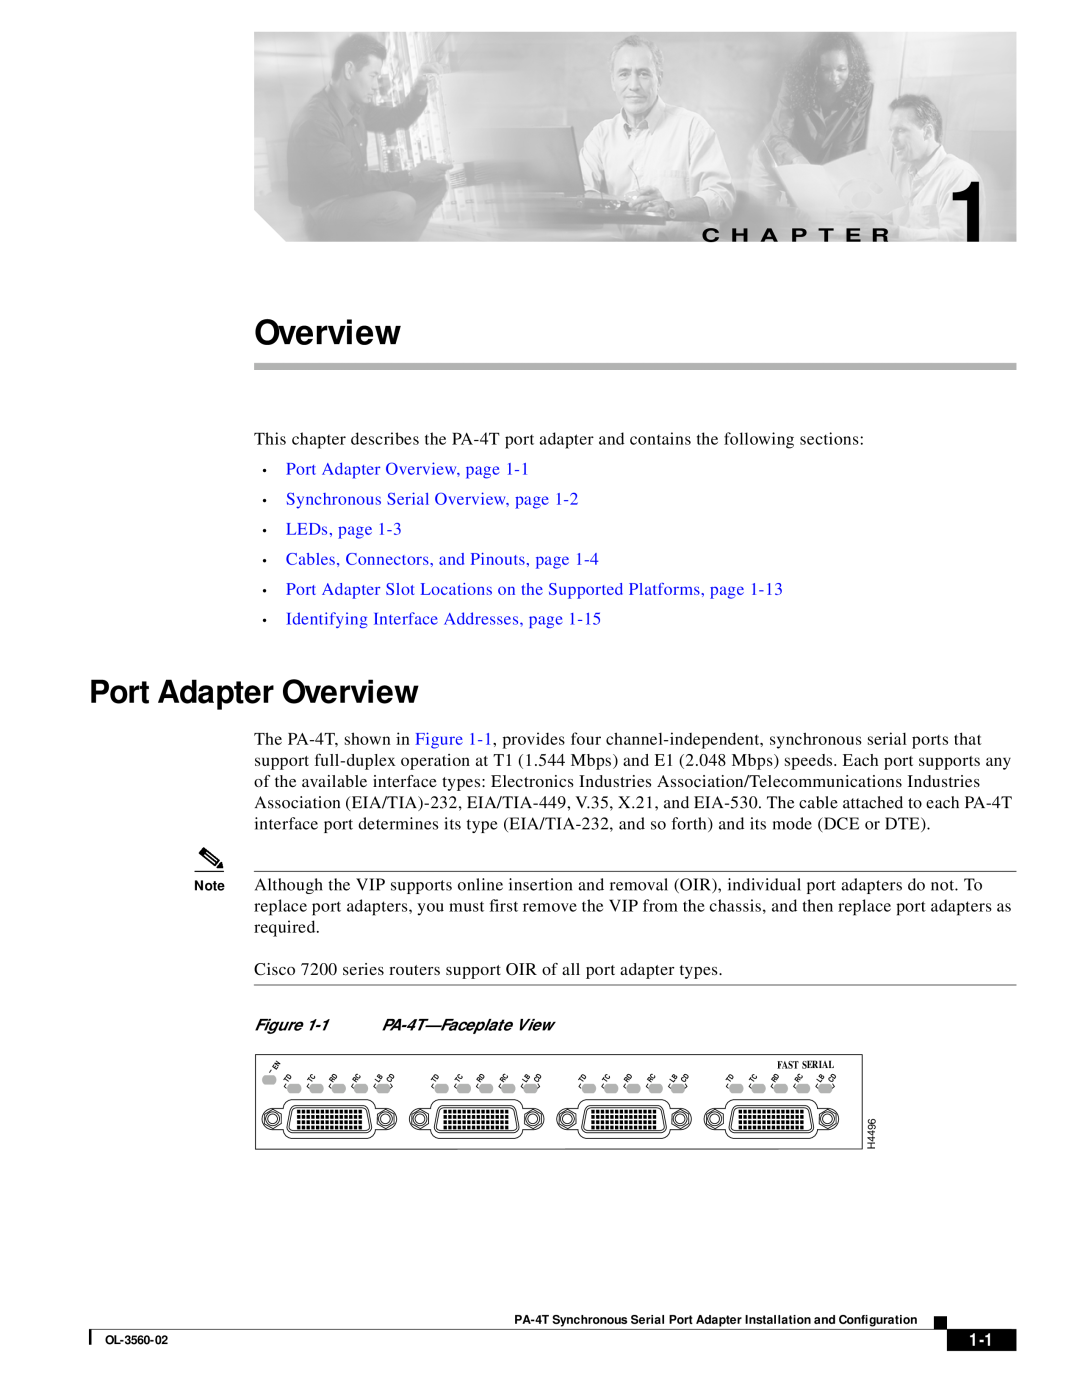 Cisco Systems OL-3560-02 manual Port Adapter Overview, page Synchronous Serial Overview, page, C H A P T E R 